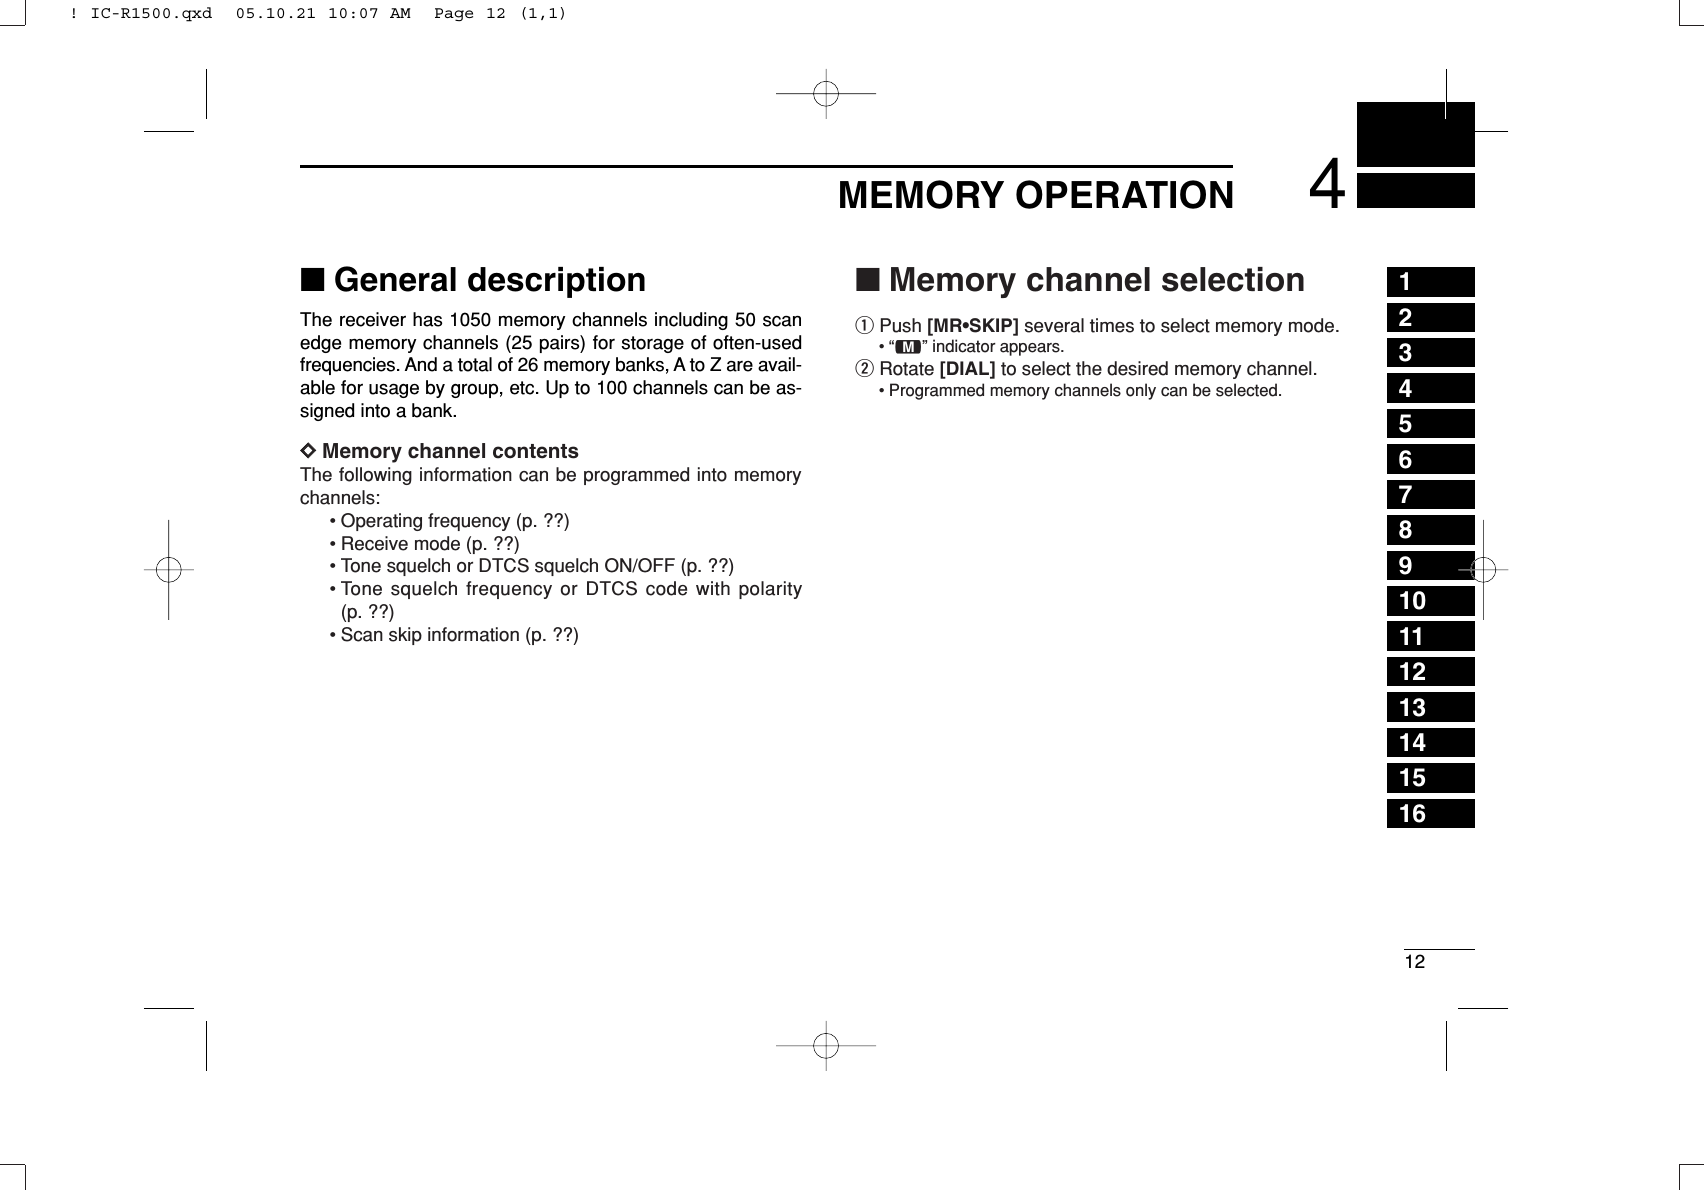 124MEMORY OPERATION12345678910111213141516■General descriptionThe receiver has 1050 memory channels including 50 scanedge memory channels (25 pairs) for storage of often-usedfrequencies. And a total of 26 memory banks, A to Z are avail-able for usage by group, etc. Up to 100 channels can be as-signed into a bank.DDMemory channel contentsThe following information can be programmed into memorychannels:• Operating frequency (p. ??)• Receive mode (p. ??)• Tone squelch or DTCS squelch ON/OFF (p. ??)• Tone squelch frequency or DTCS code with polarity(p. ??)• Scan skip information (p. ??)■Memory channel selectionqPush [MR•SKIP] several times to select memory mode.•“!” indicator appears.wRotate [DIAL] to select the desired memory channel.• Programmed memory channels only can be selected.! IC-R1500.qxd  05.10.21 10:07 AM  Page 12 (1,1)